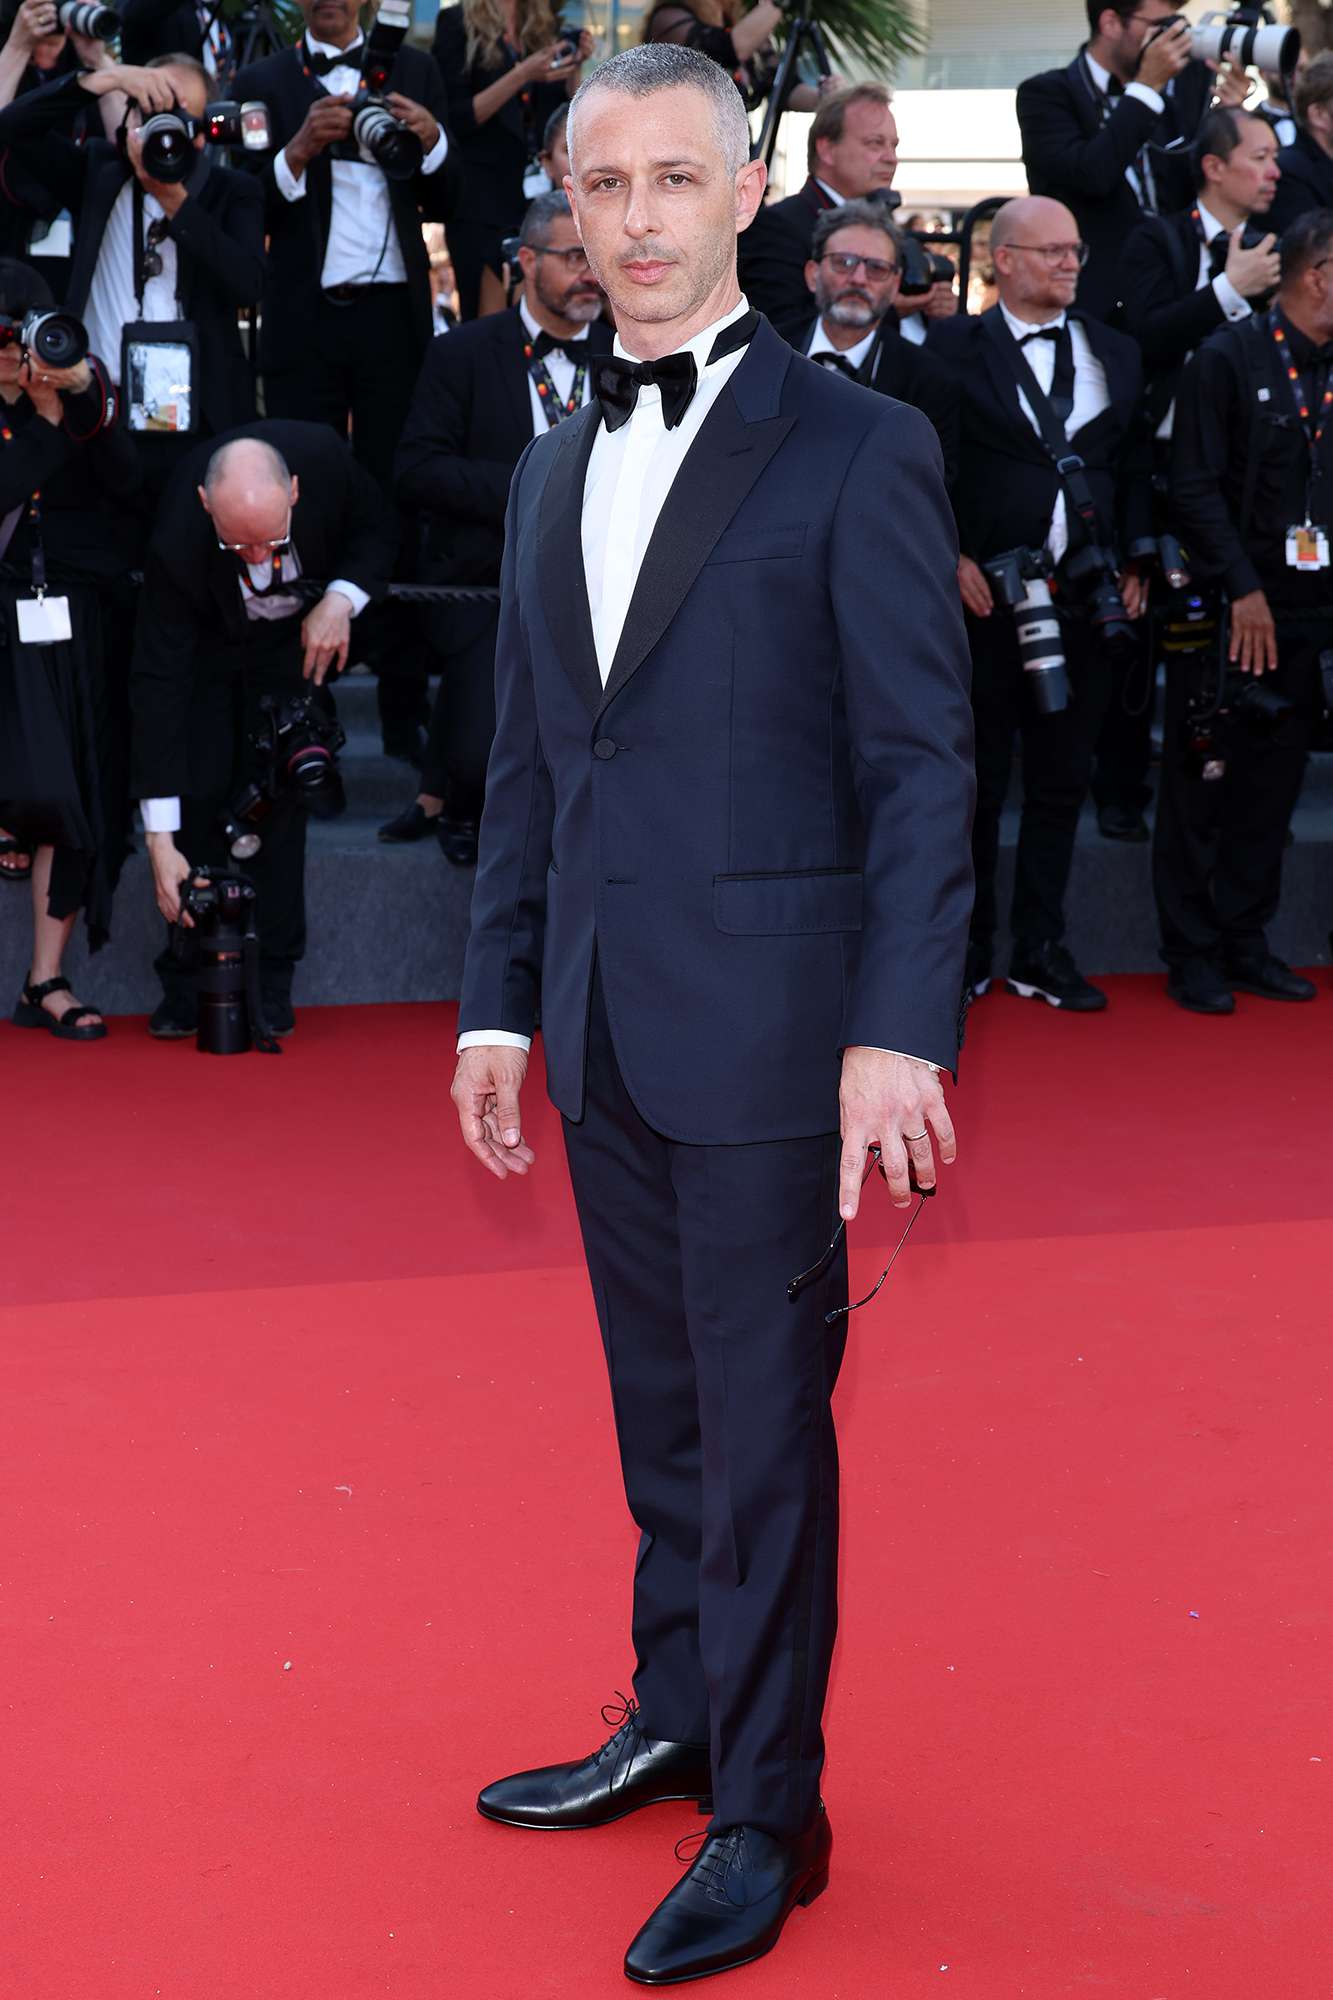 Cannes Film Festival 2022 Jeremy Strong attends the screening of "Armageddon Time" during the 75th annual Cannes film festival at Palais des Festivals on May 19, 2022 in Cannes, France.